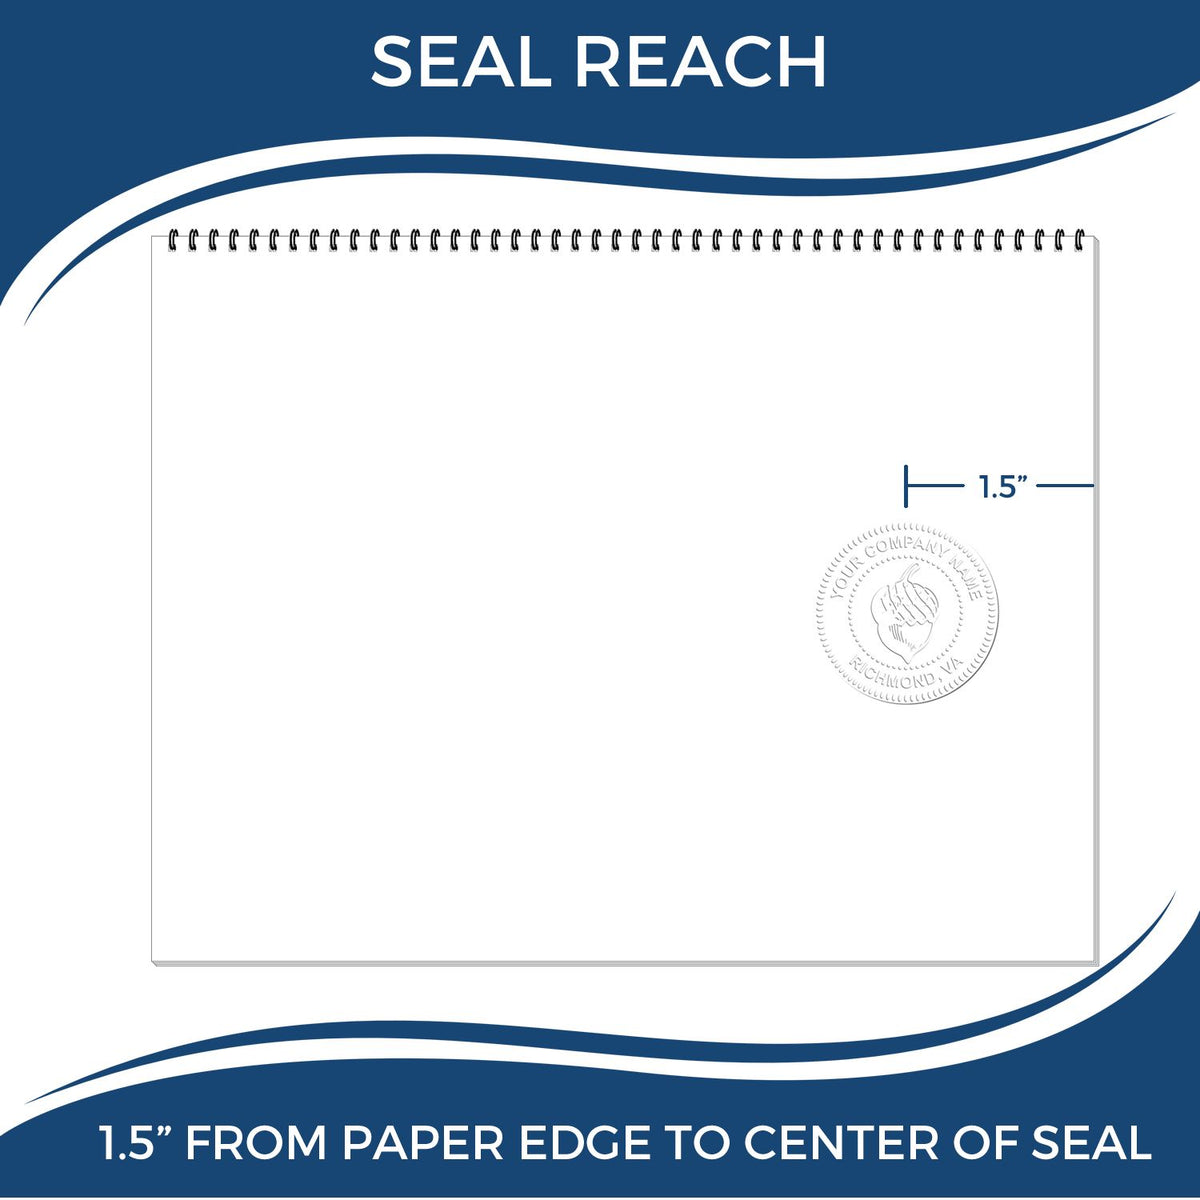 An infographic showing the seal reach which is represented by a ruler and a miniature seal image of the Handheld Illinois Professional Engineer Embosser